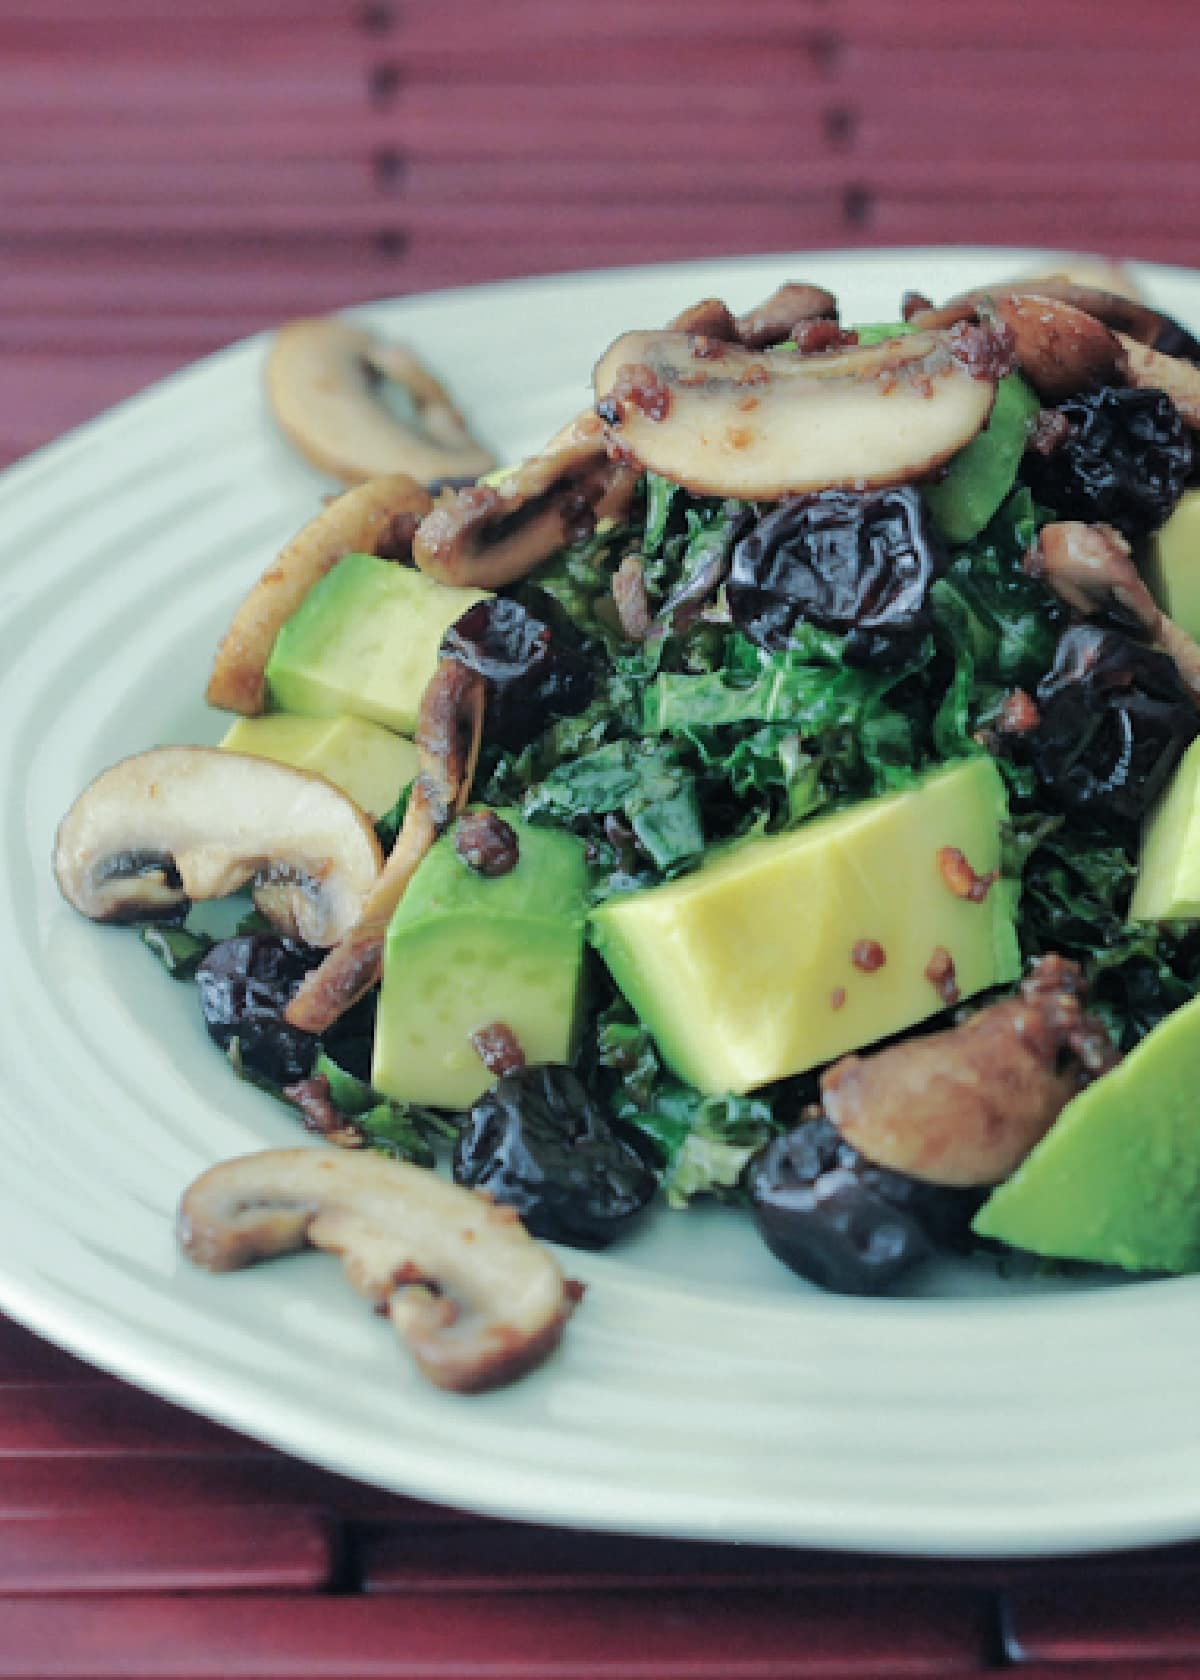 kale salad with warm bacon dressing is kale, cubed avocado, bacon flavored mushrooms on a light green plate with a reddish brown wooden slats placemat.